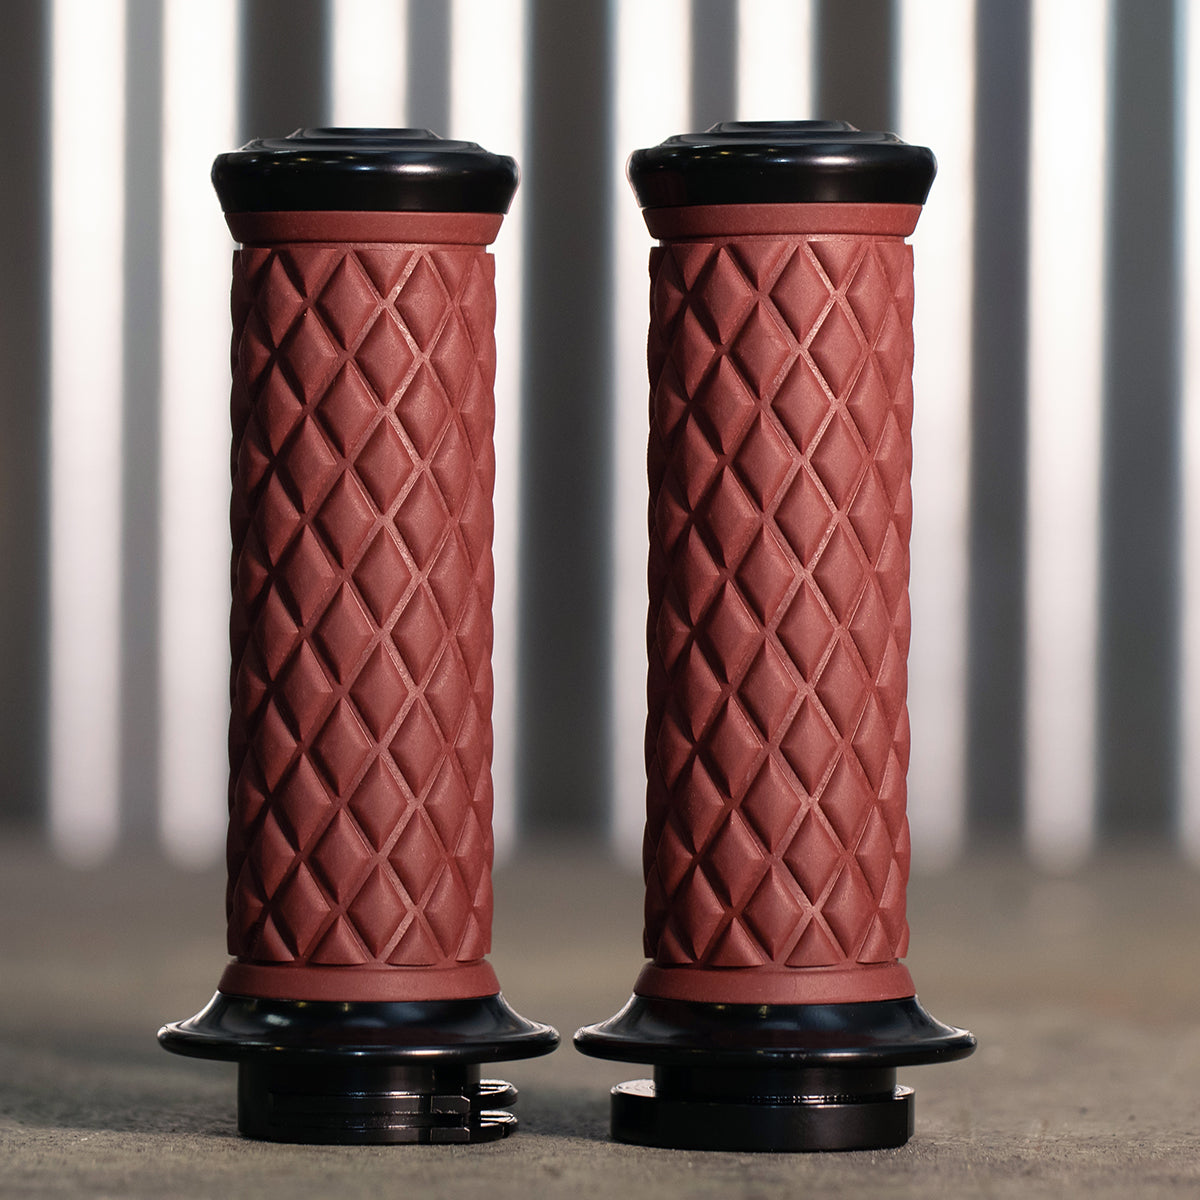 AlumiCore Replacement Sleeves - Thruster Oxblood